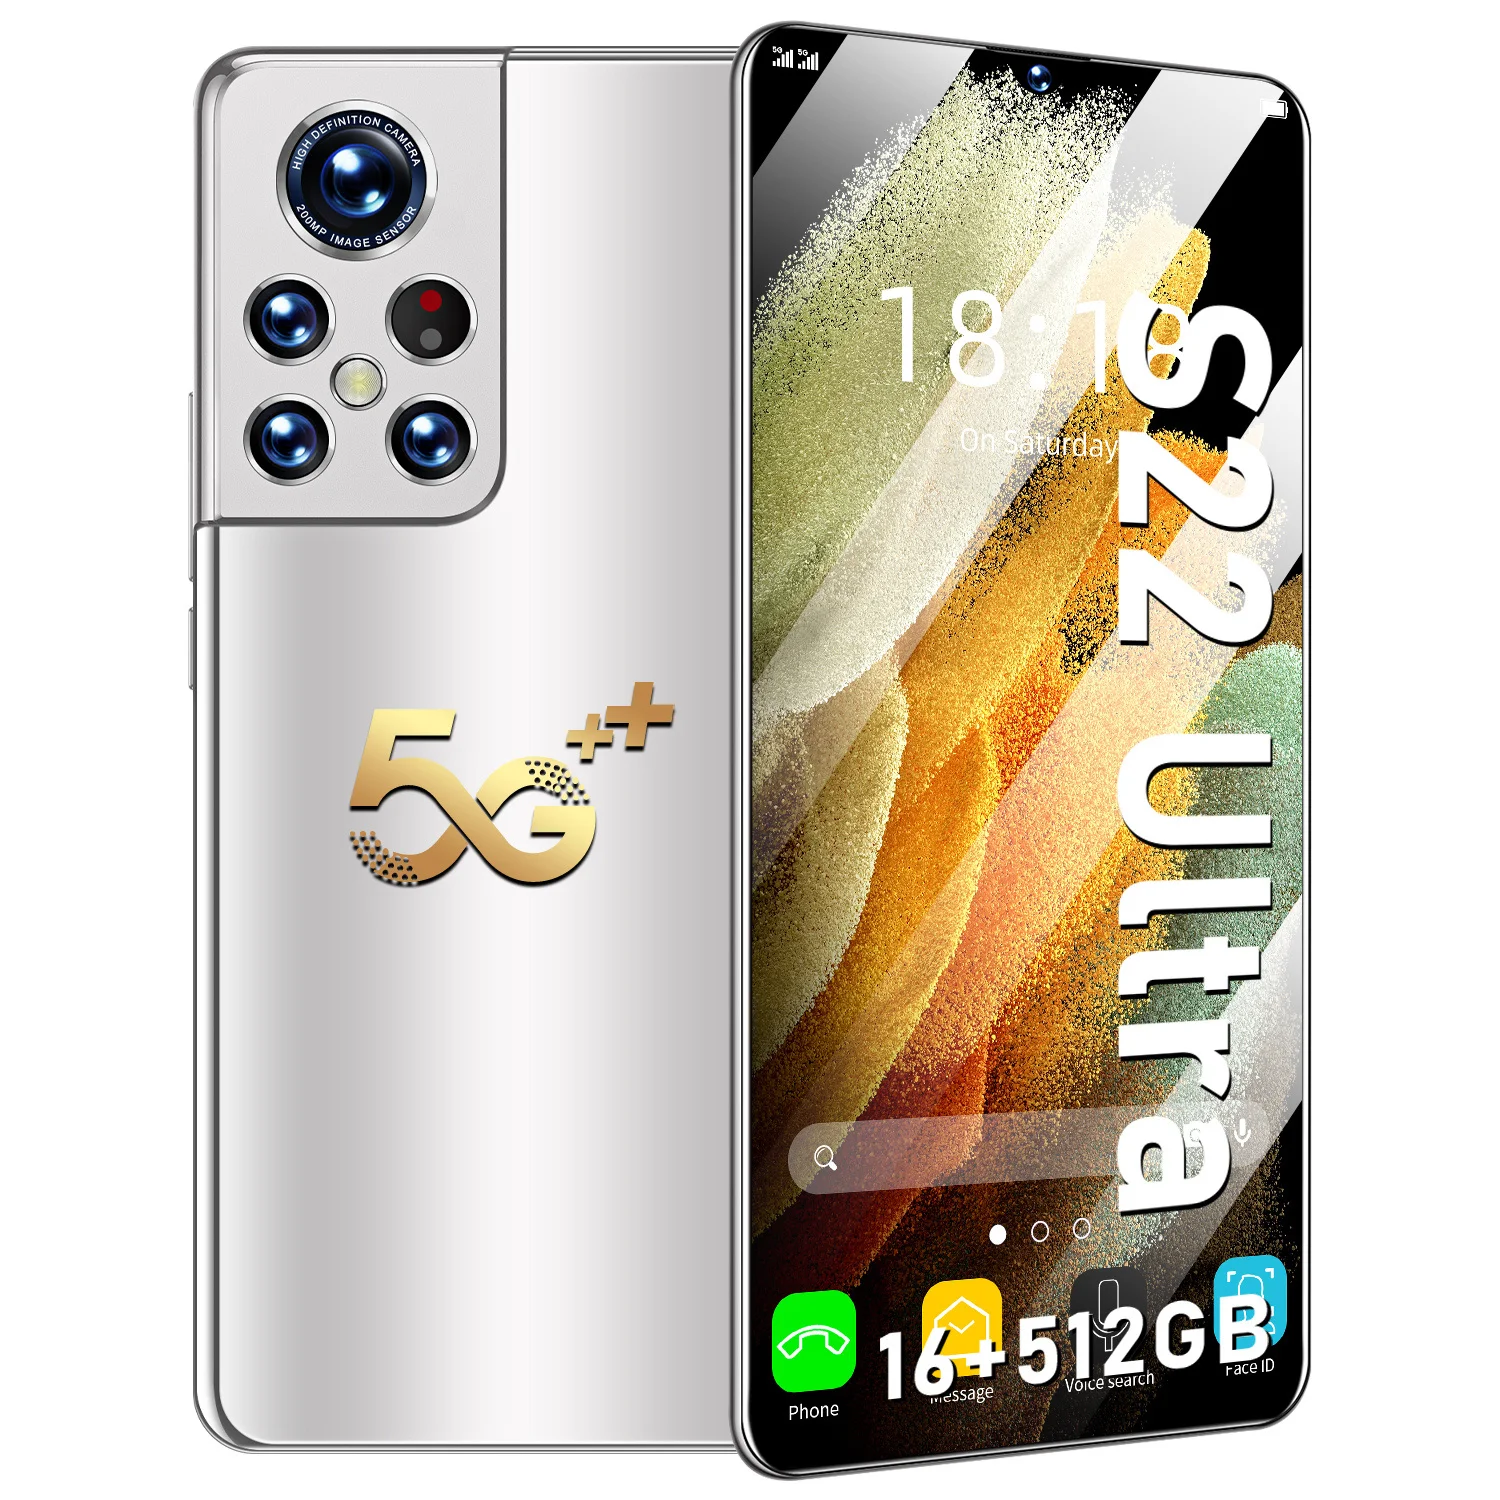 

2021 New Arrival S22 Ultra Smartphone 16+512GB Android 5G Mobile Phones Dual SIM Cards Long Standby 6.9 inch Full Screen Phones